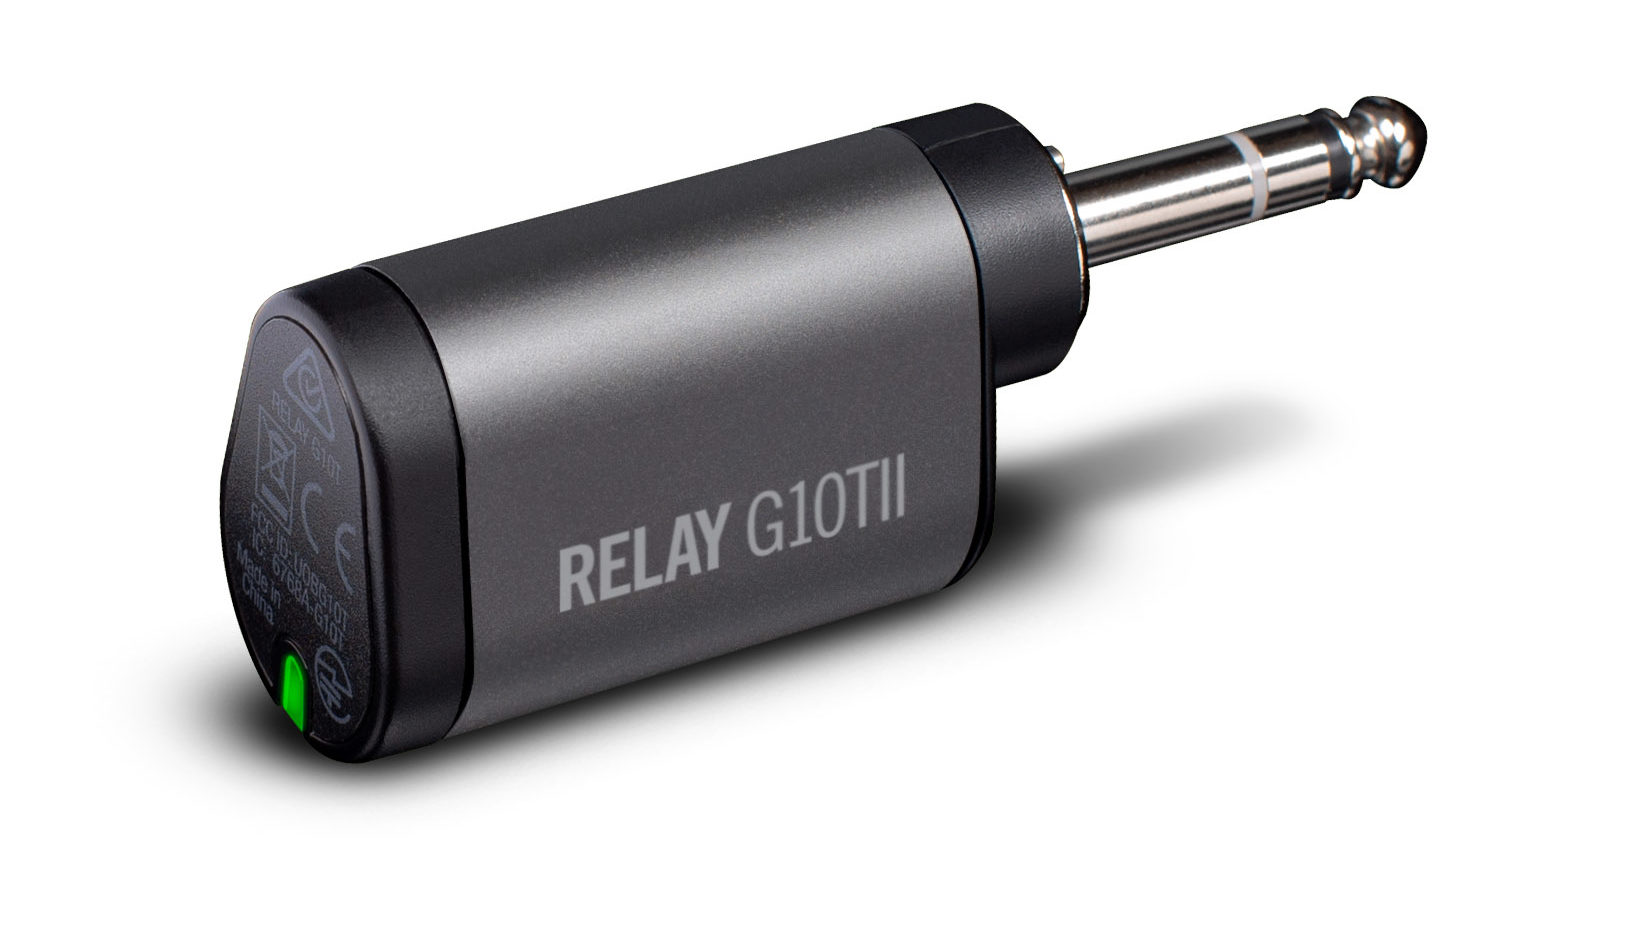 RELAY G10TII